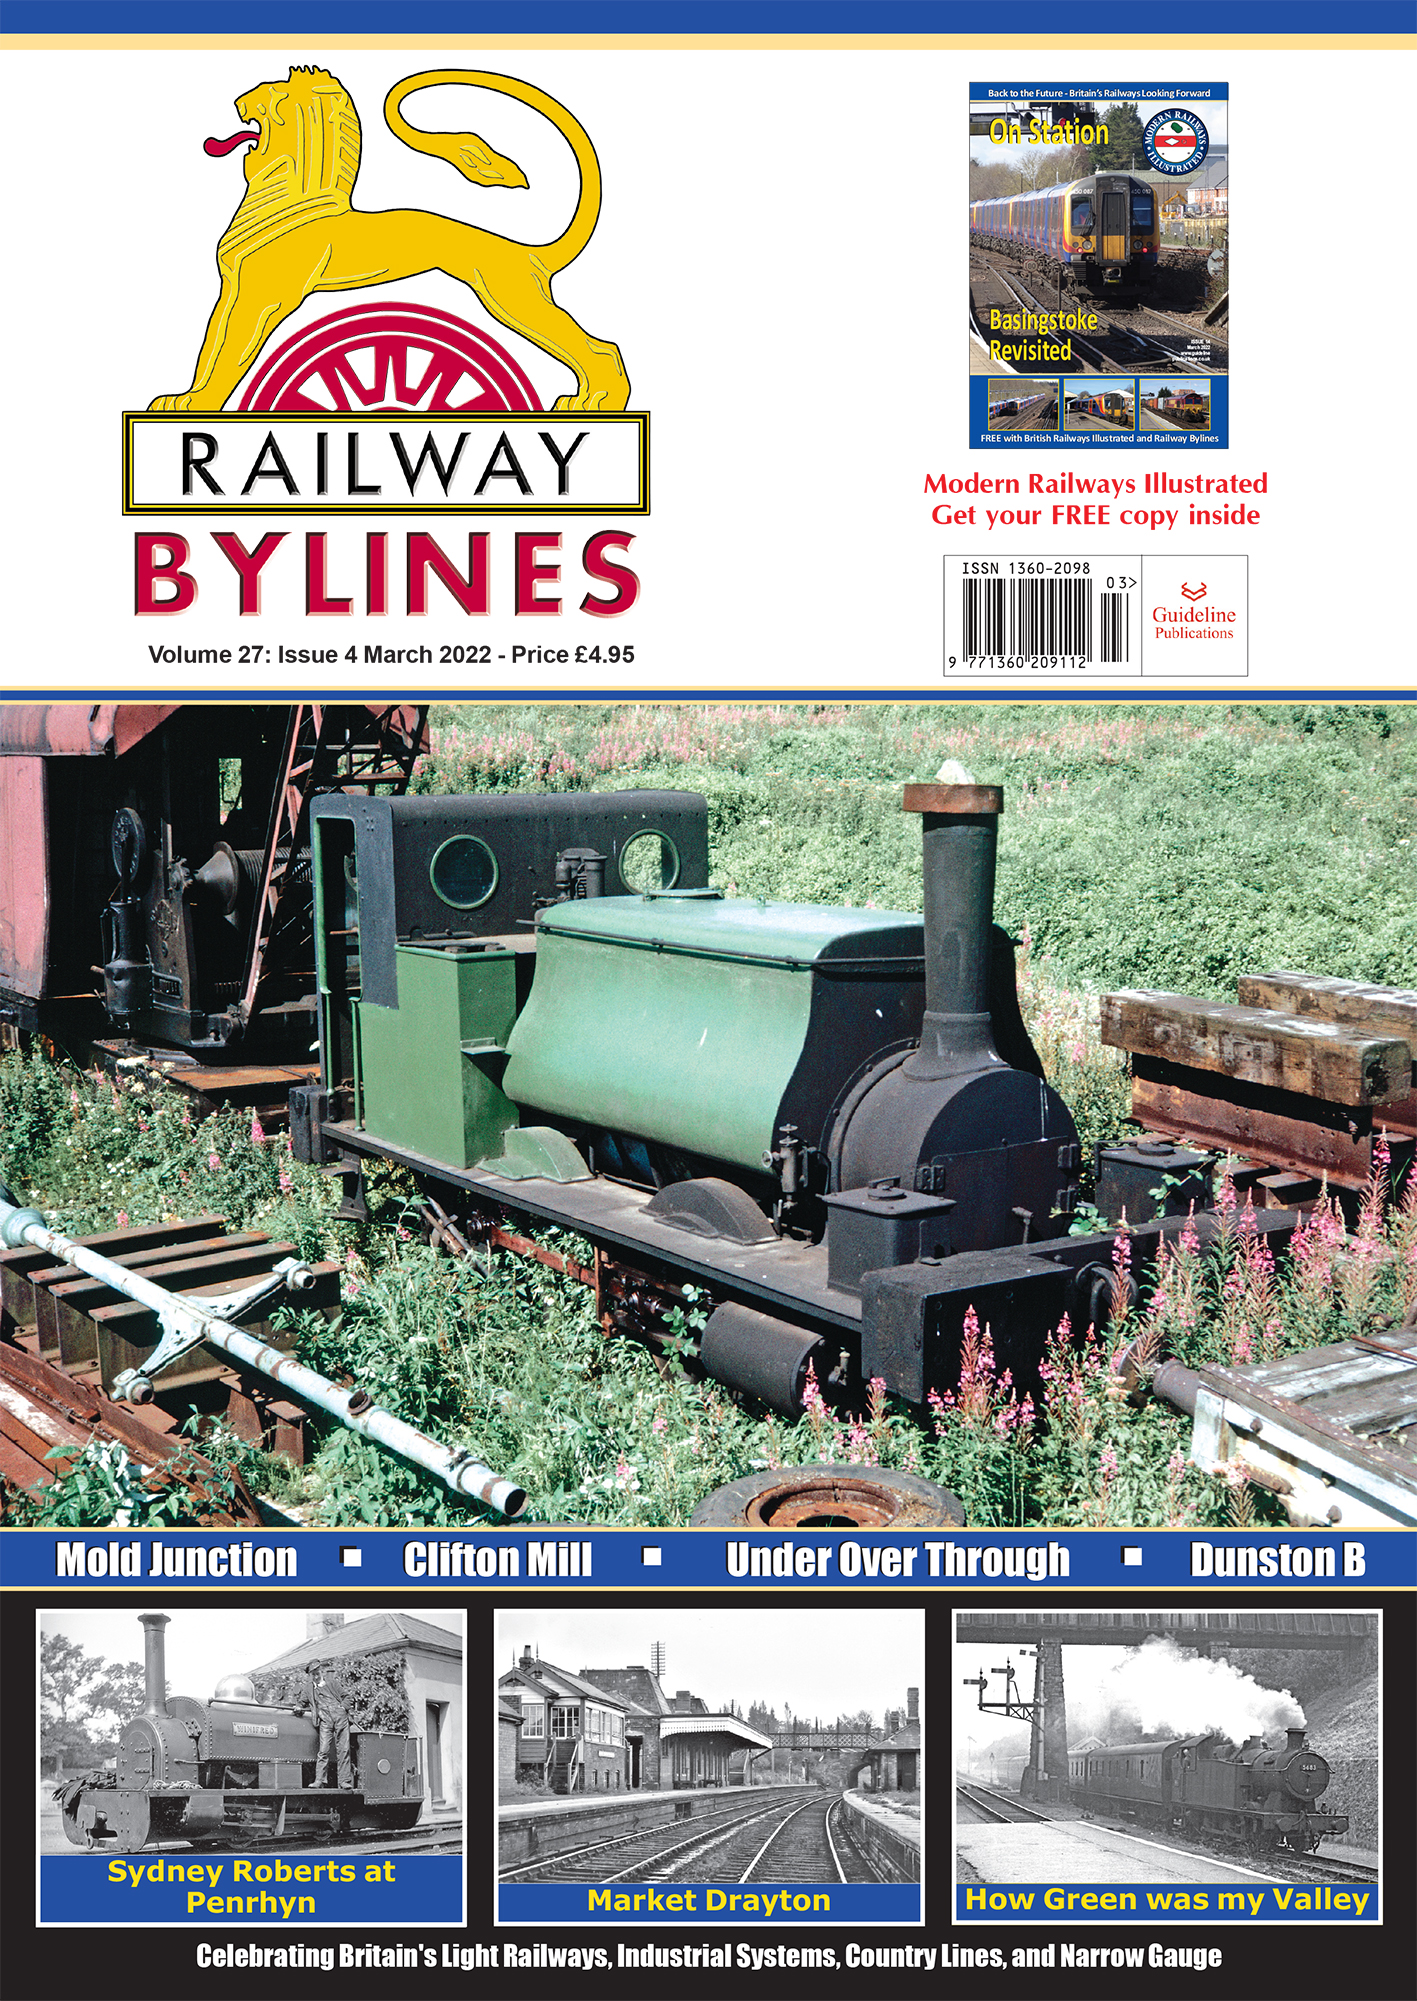 Guideline Publications Ltd Railway Bylines  vol 27 - issue 04 March 22 